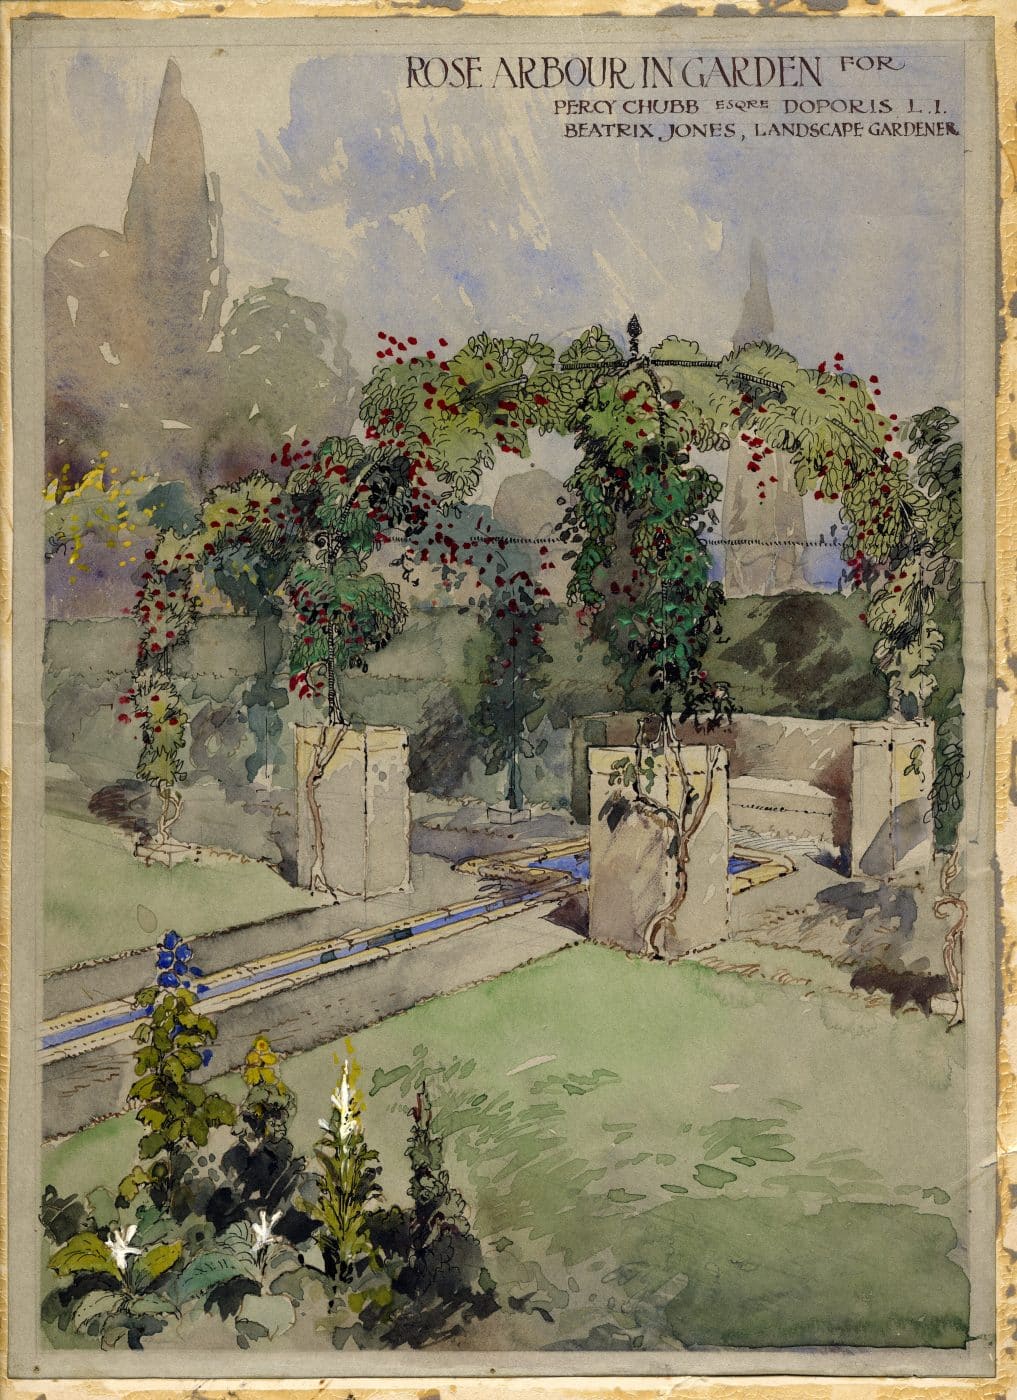 A rendering of a rose arbor and water rill in the Percy Chubb garden in Glen Cove, New York, around 1900